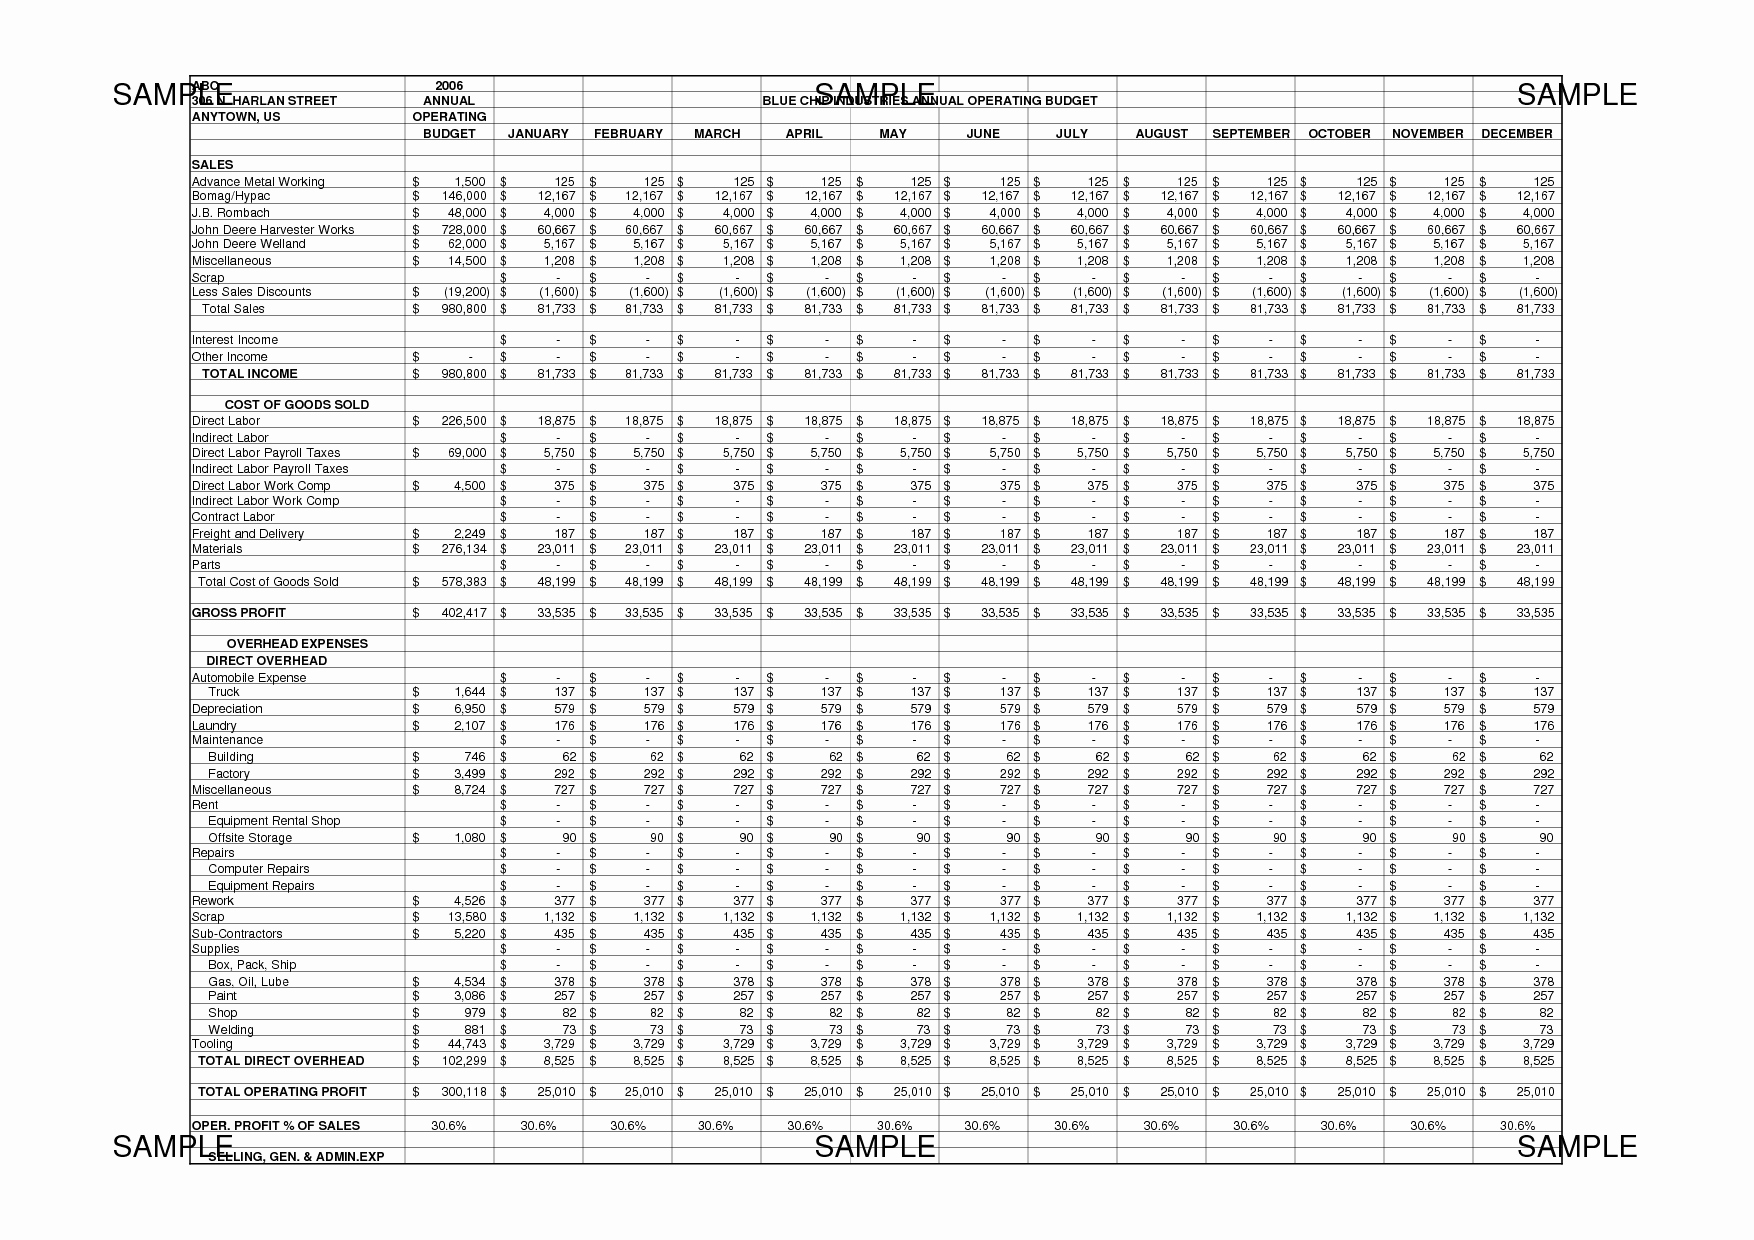 Annual Operating Budget Template New Best S Of Annual Operating Bud Template Annual